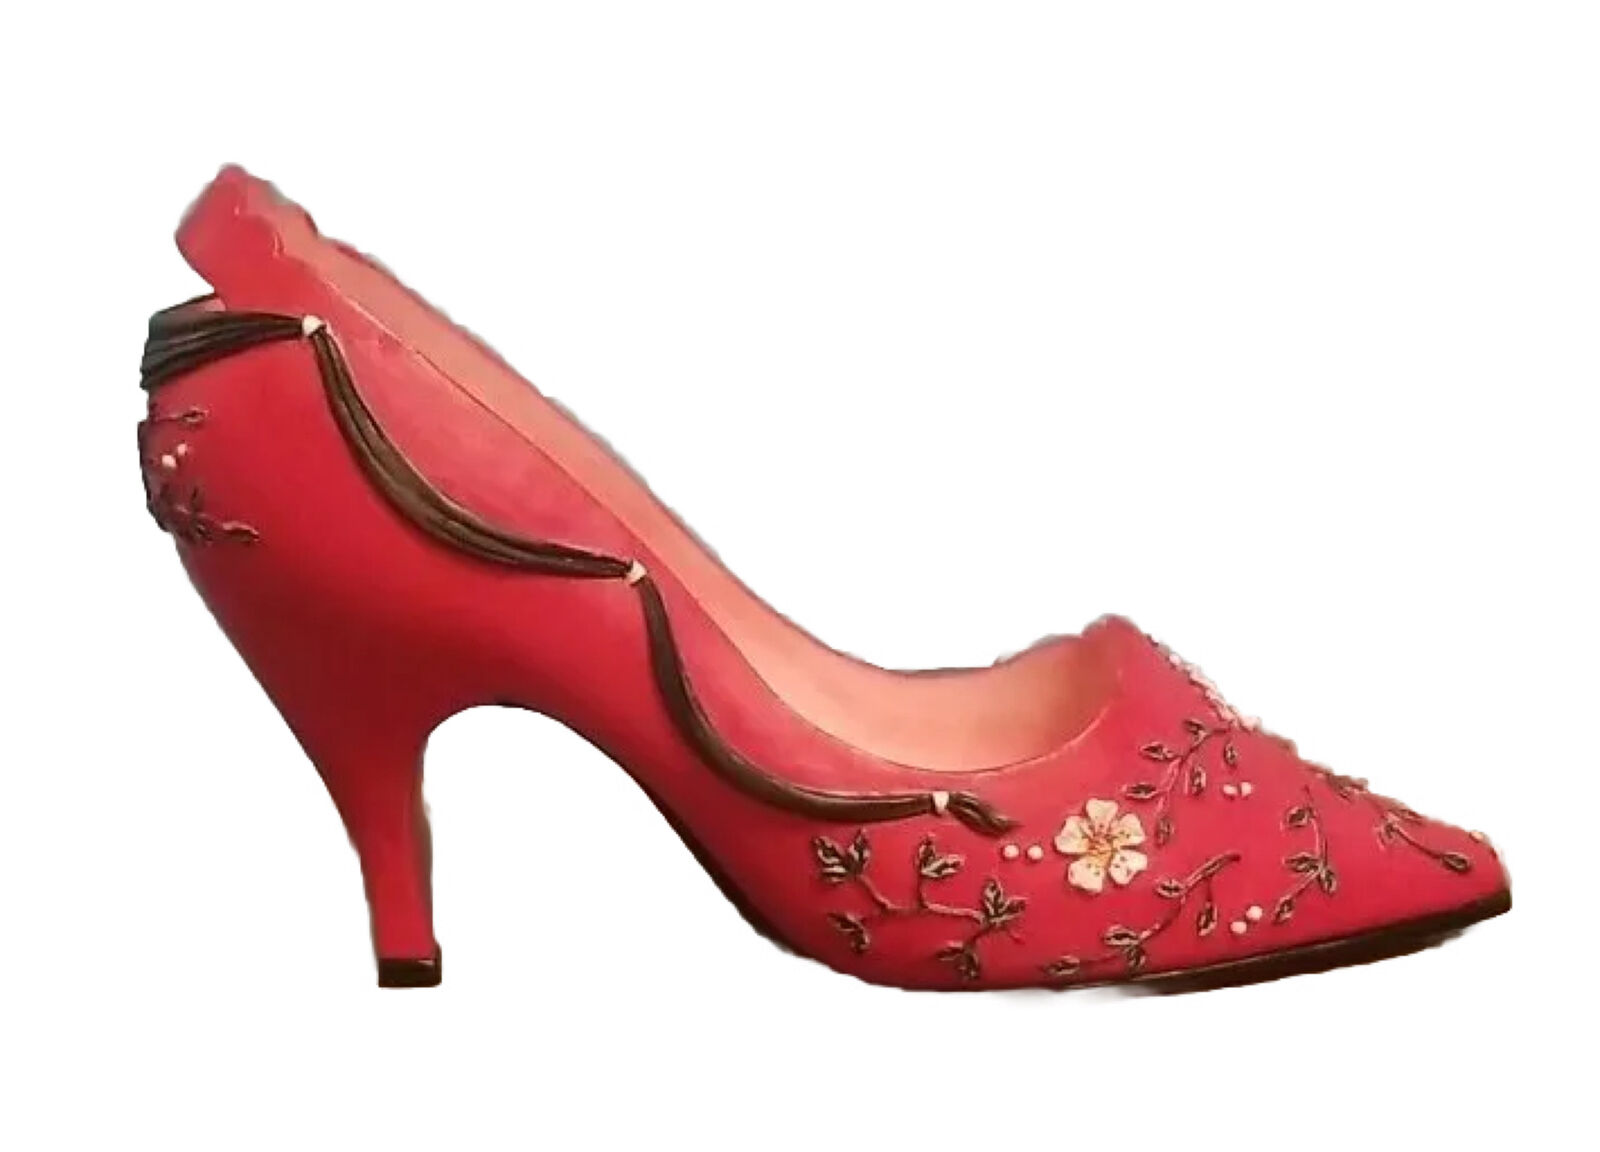 Willow Hall Age Of Elegance Shoes #7217 Scarlet Sensation, c. 1960 Victorian